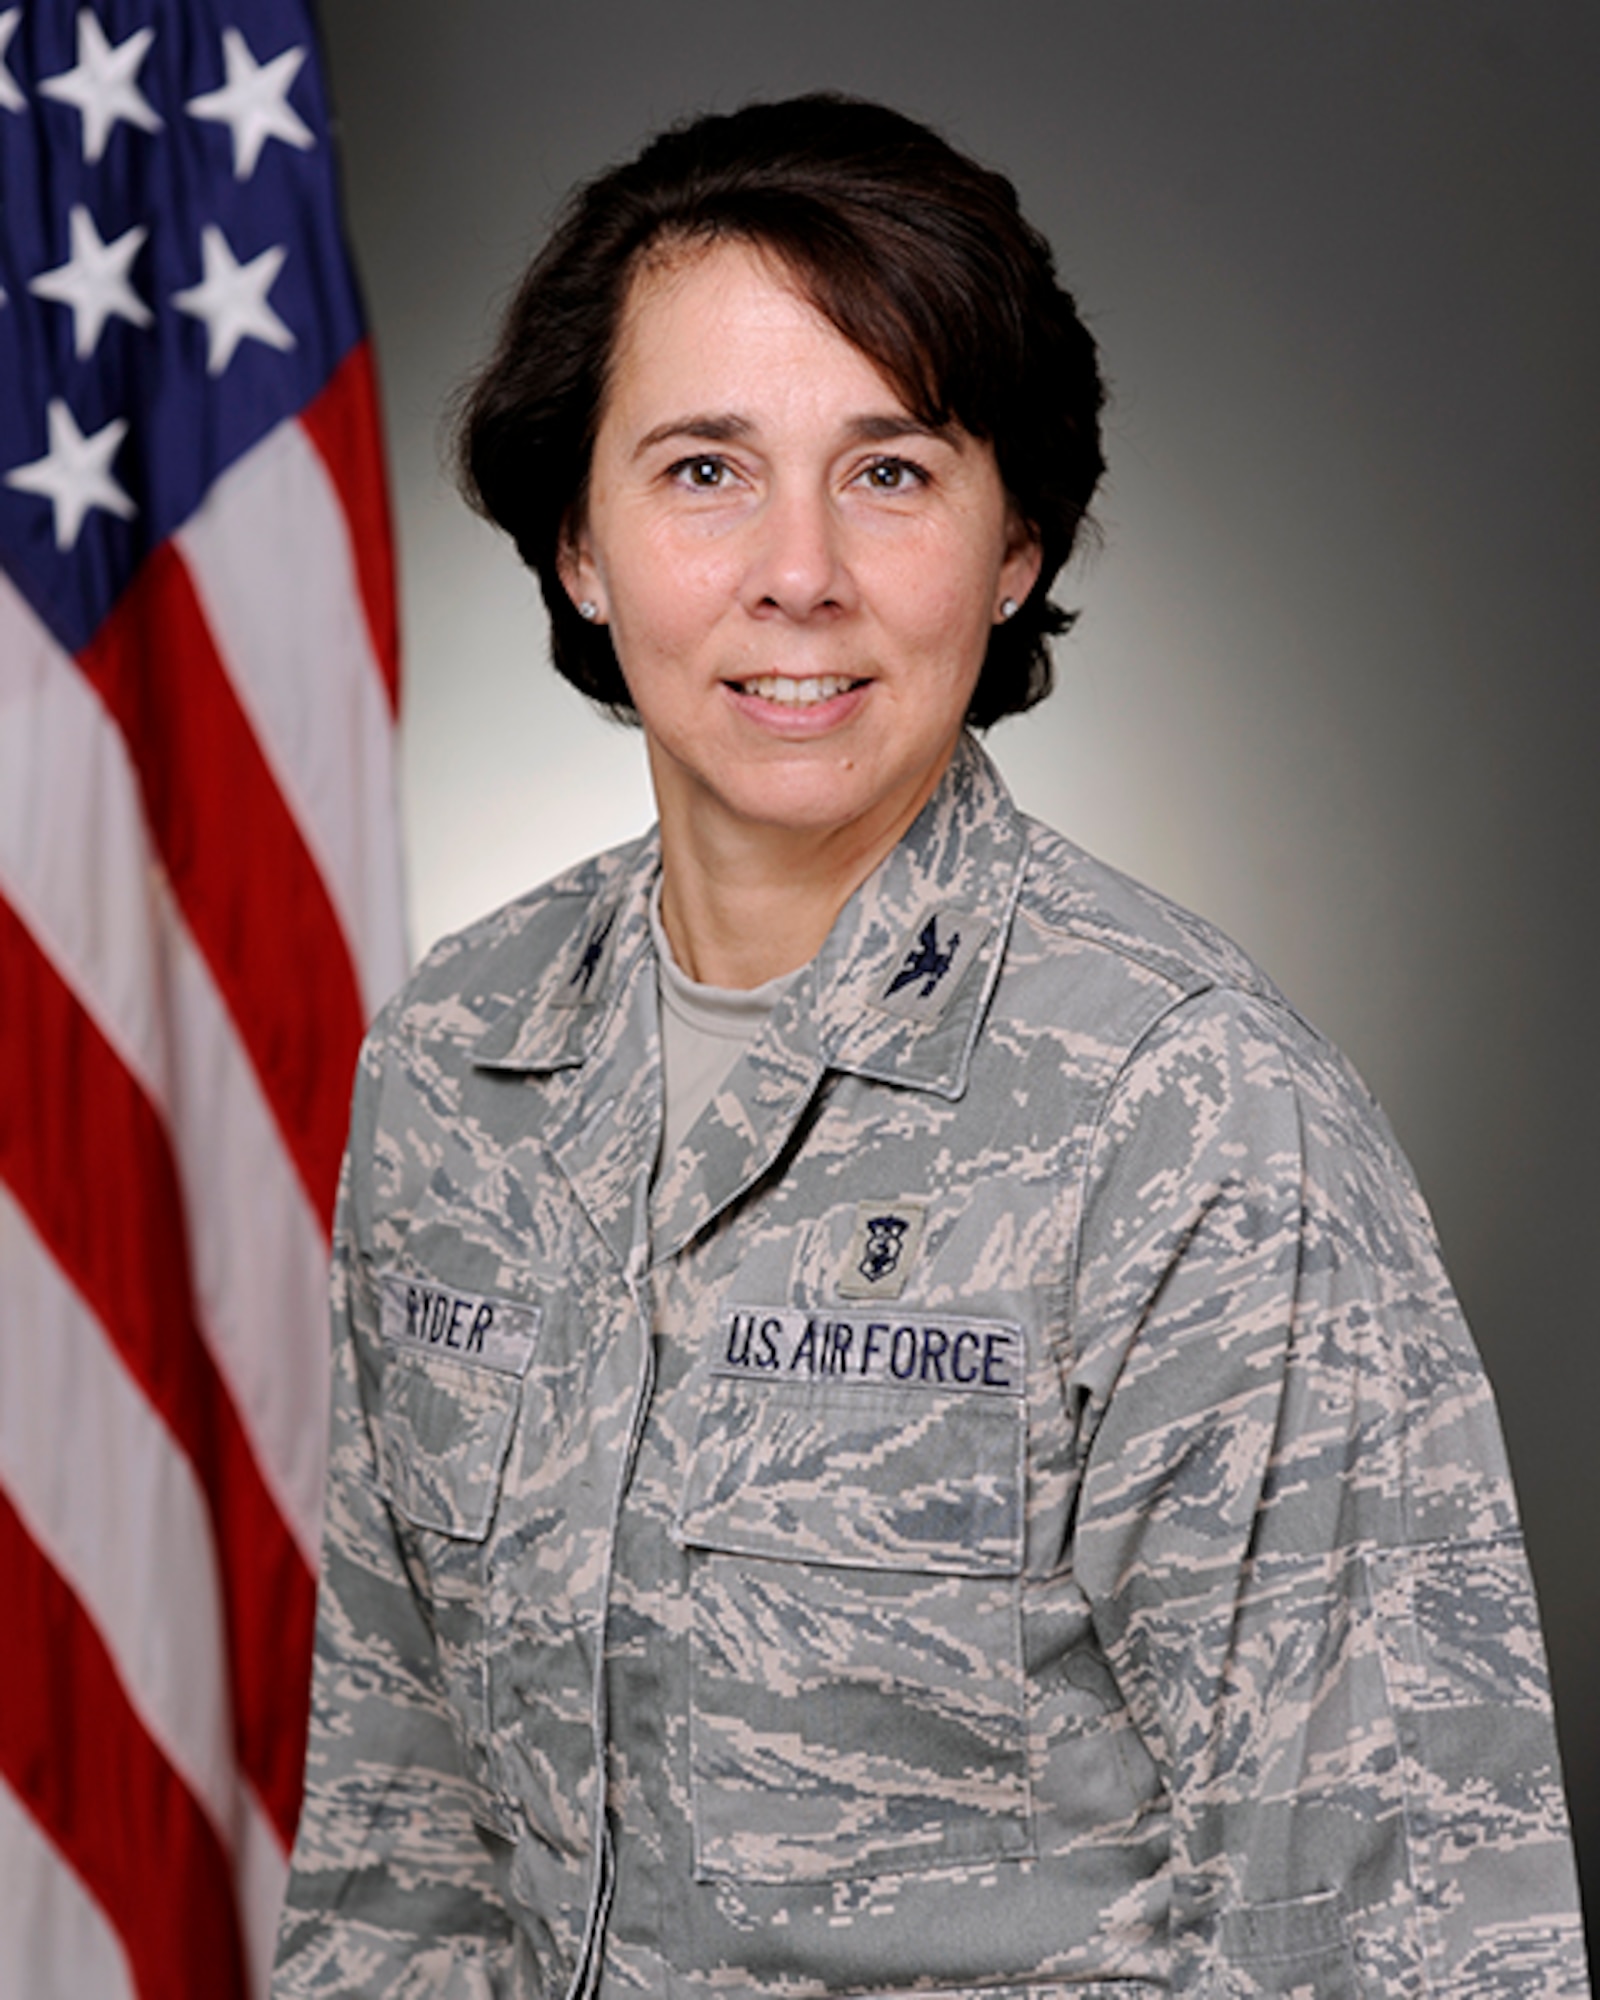 Official photo of Col. Jeannine M. Ryder, Commander of the 386th Air Expeditionary Medical Group.